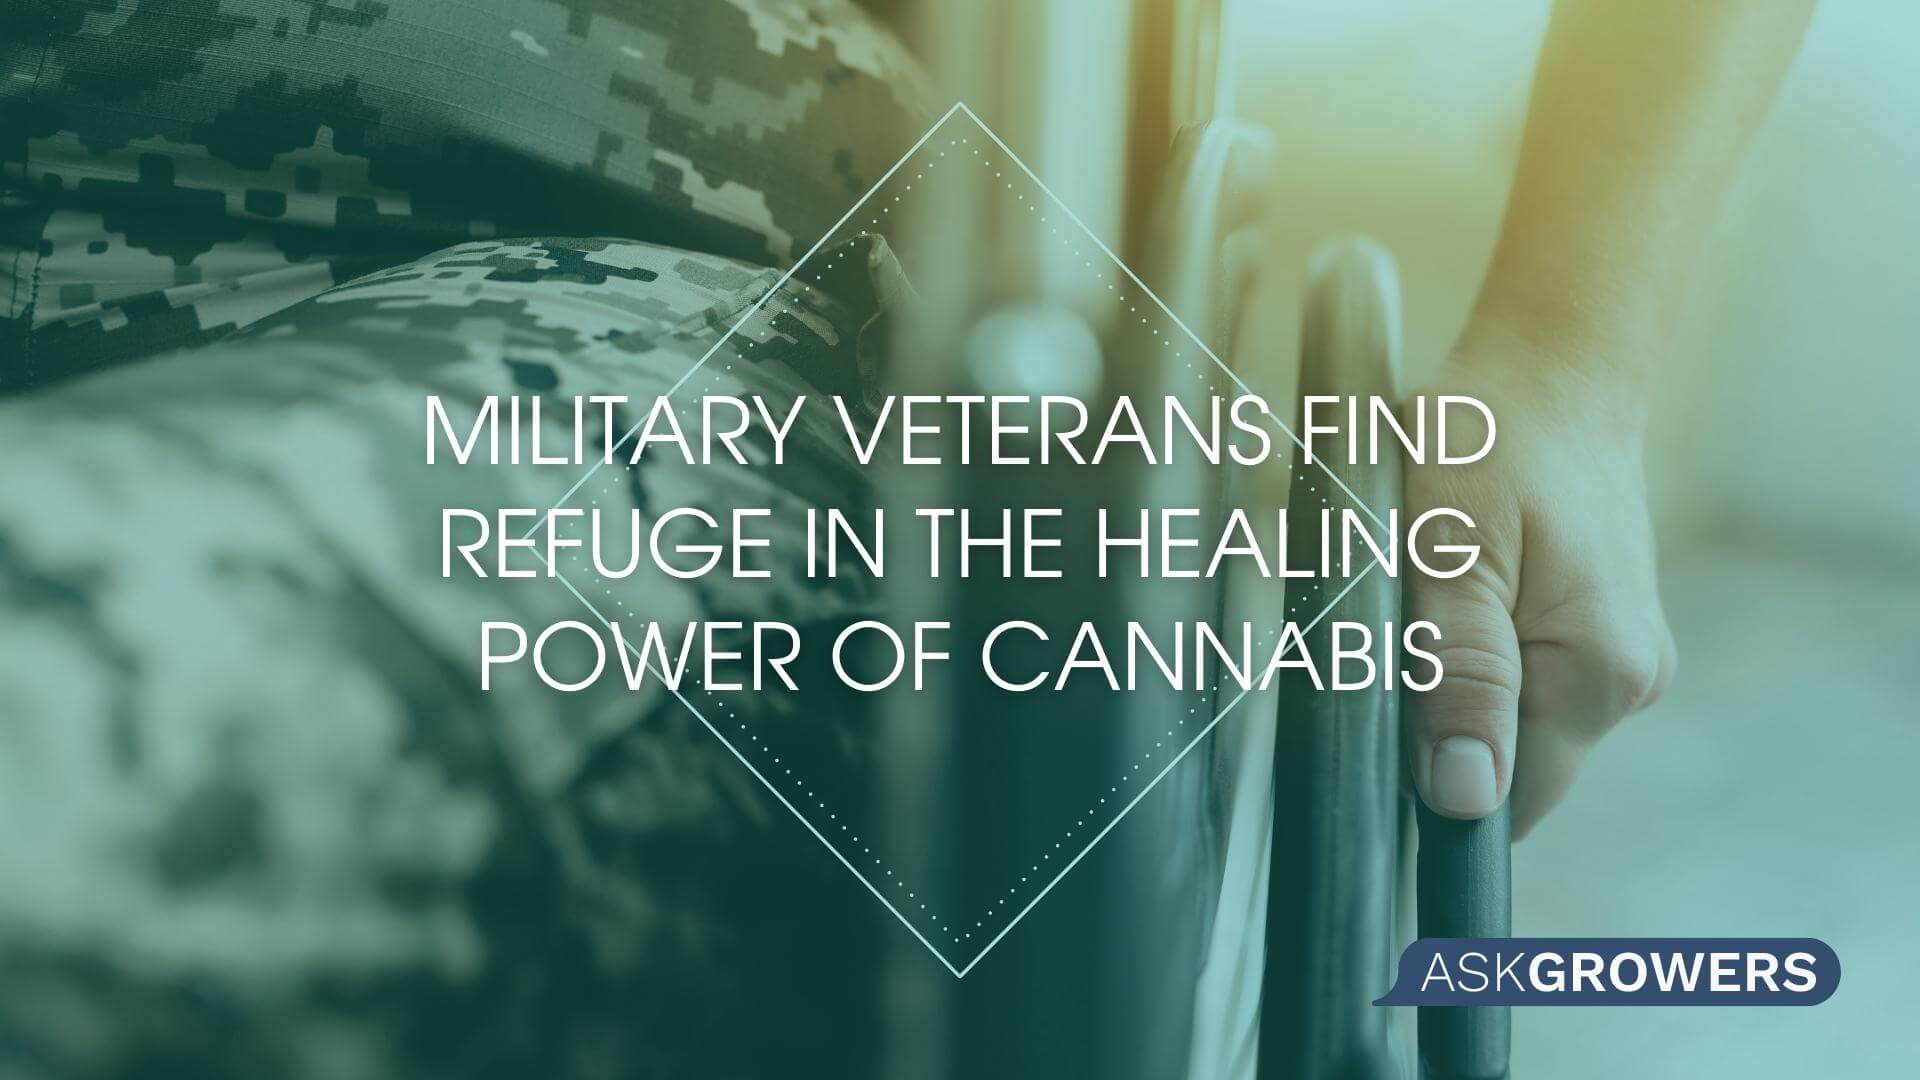 Military Veterans Find Refuge in the Healing Power of Cannabis